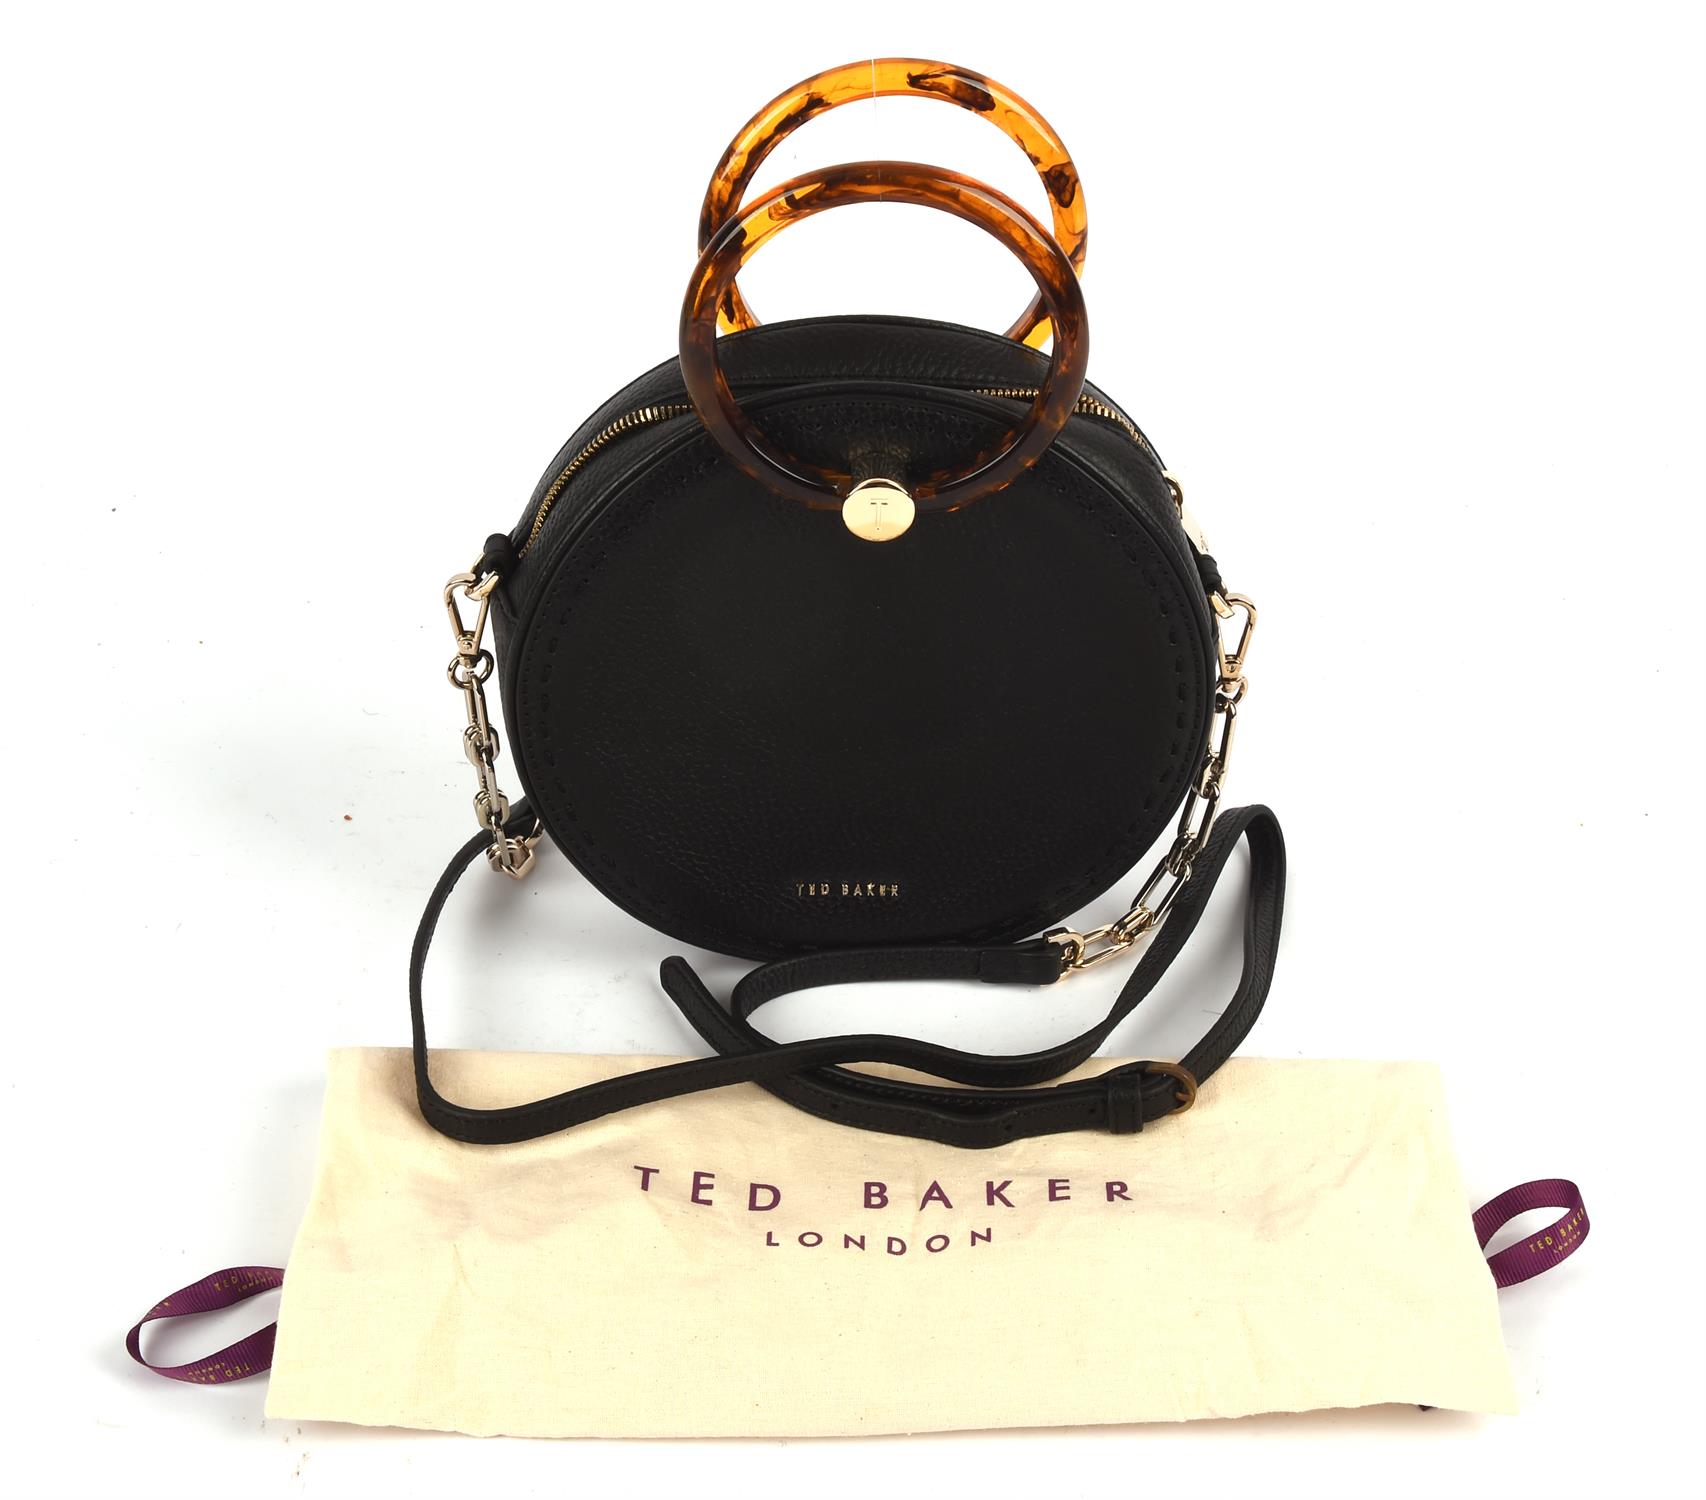 TED BAKER round black grained leather cross body handbag with brown Perspex tortoiseshell coloured